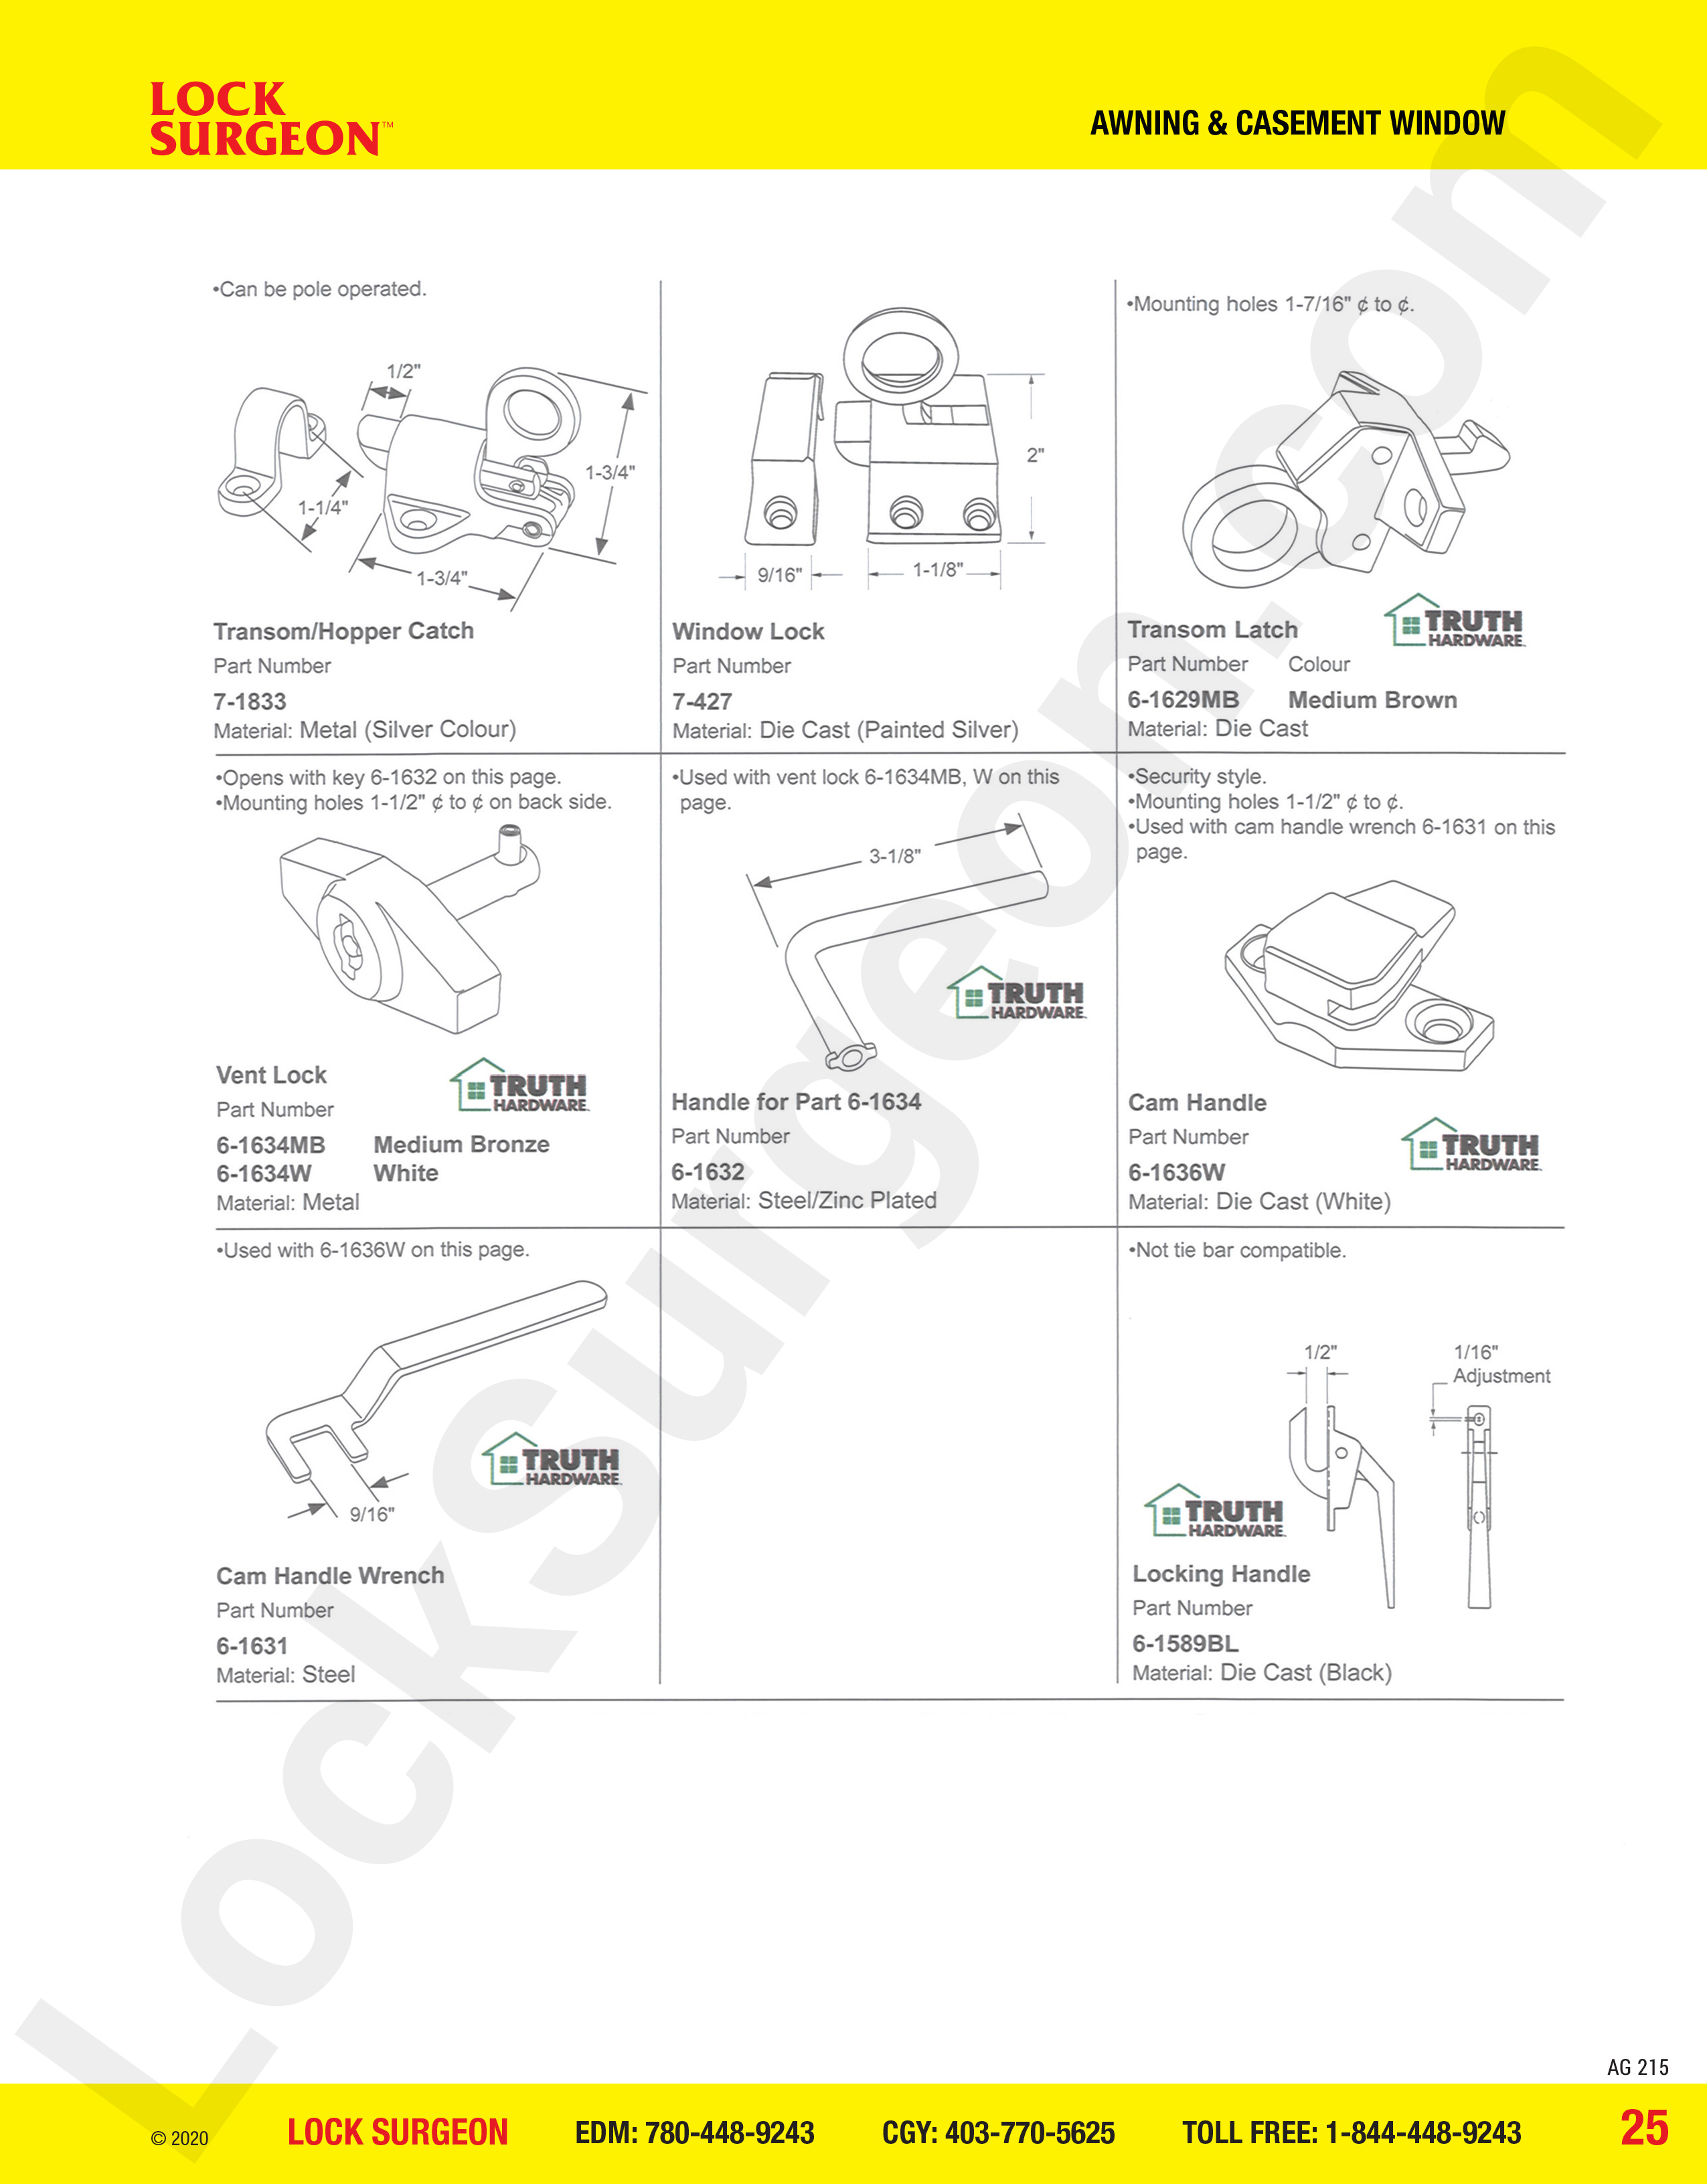 awning and casement window parts for catch, latch, lock and handle.